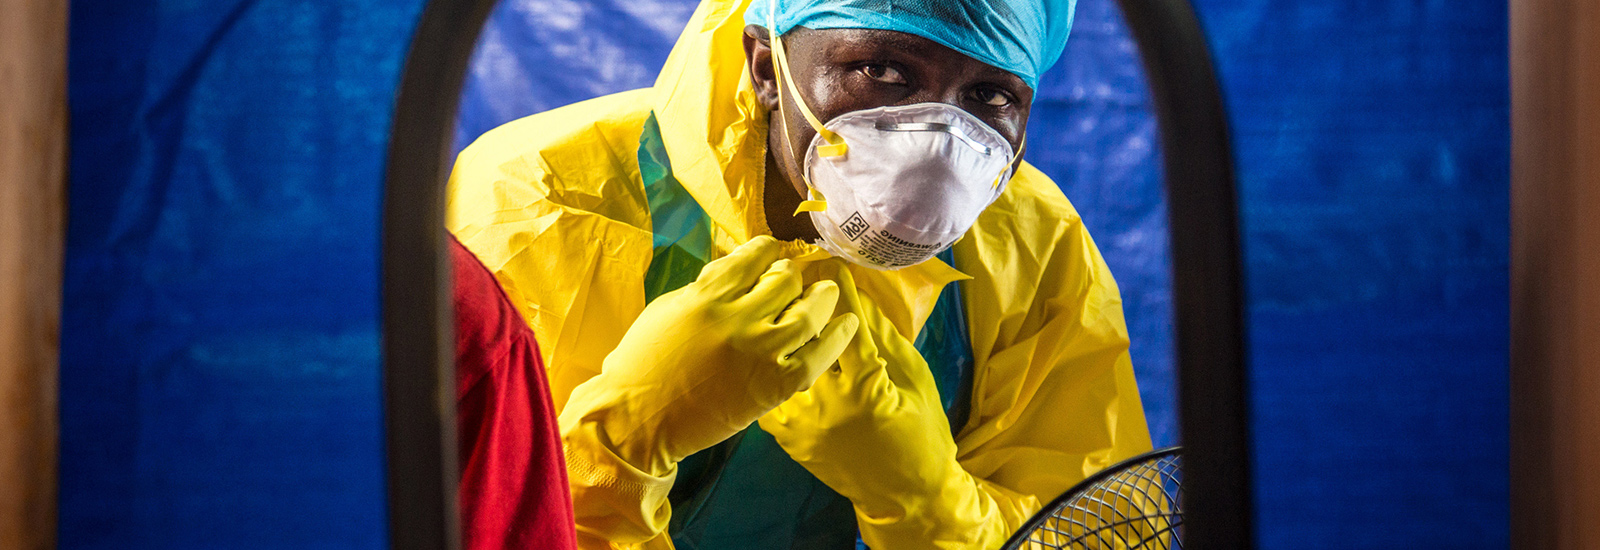 Survivors' blood plasma to treat Ebola is safe but more data needed